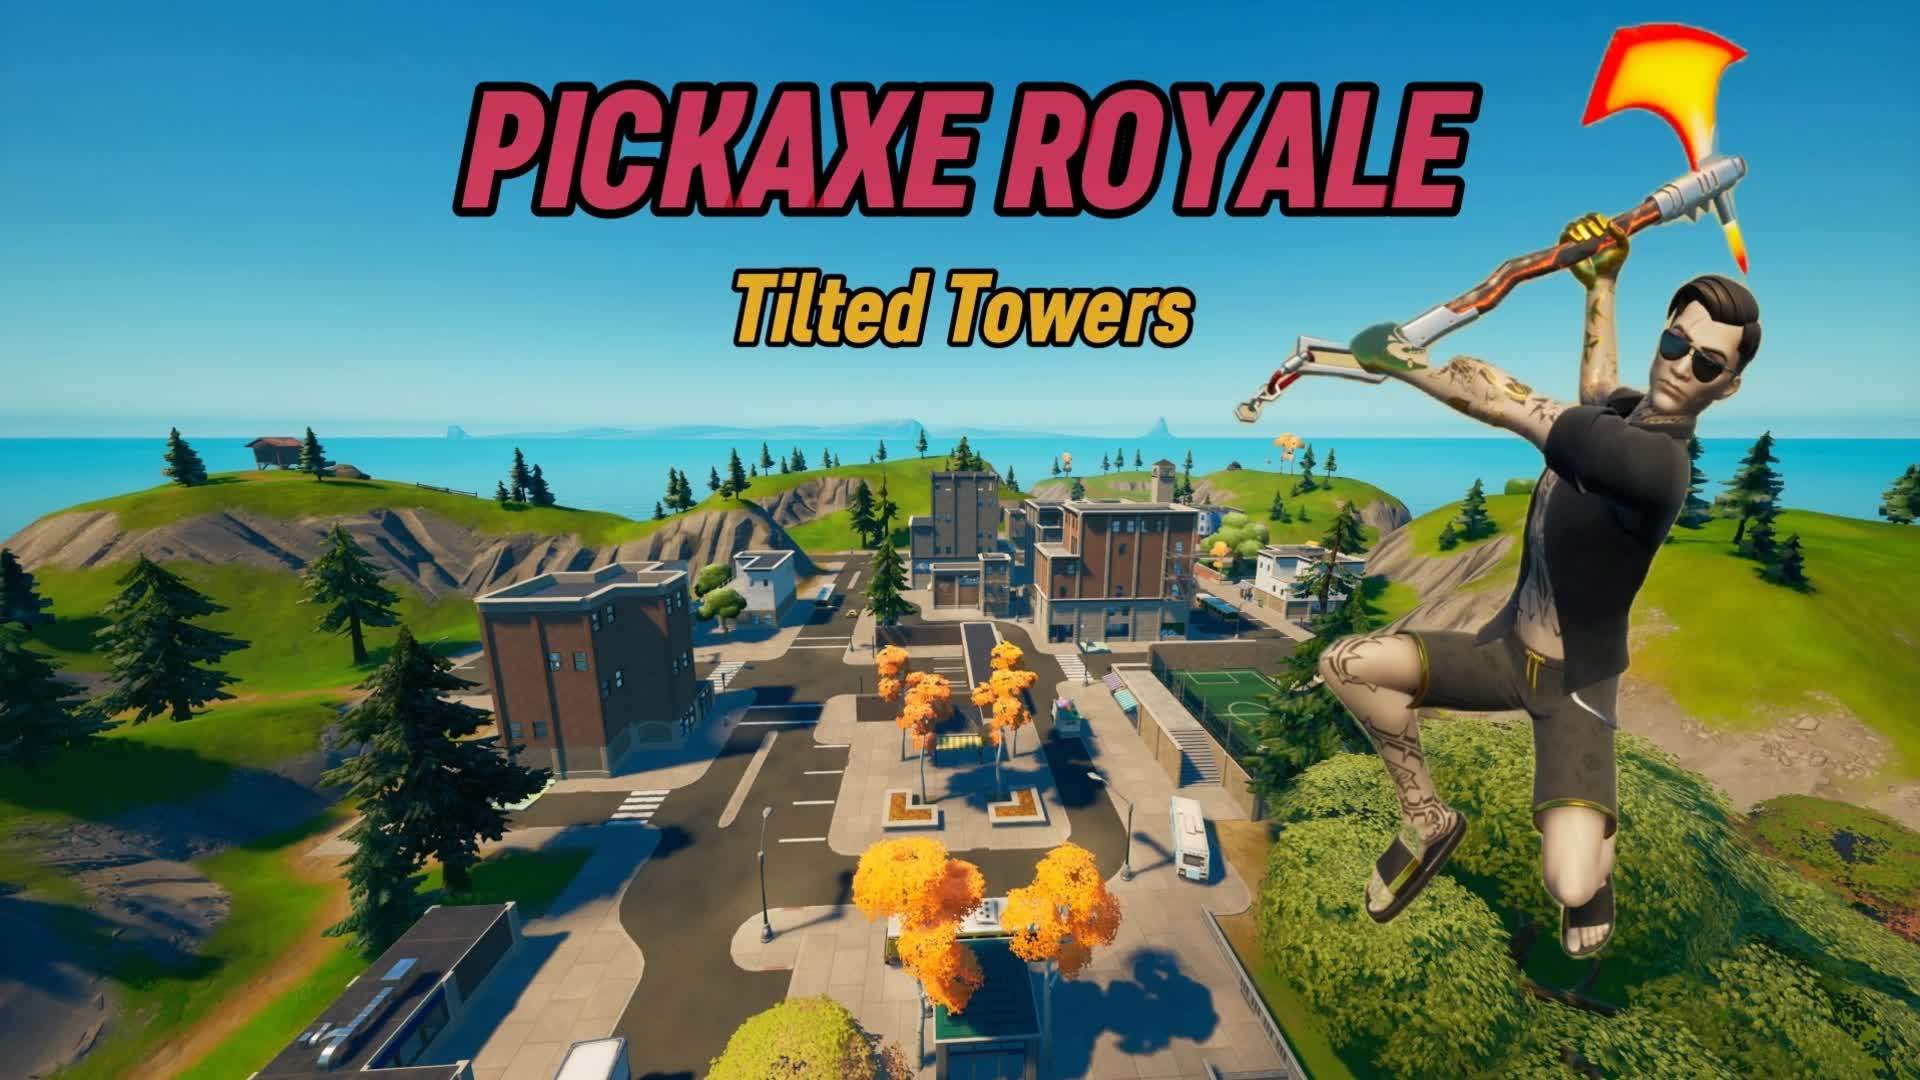 Pickaxe Royale Tilted